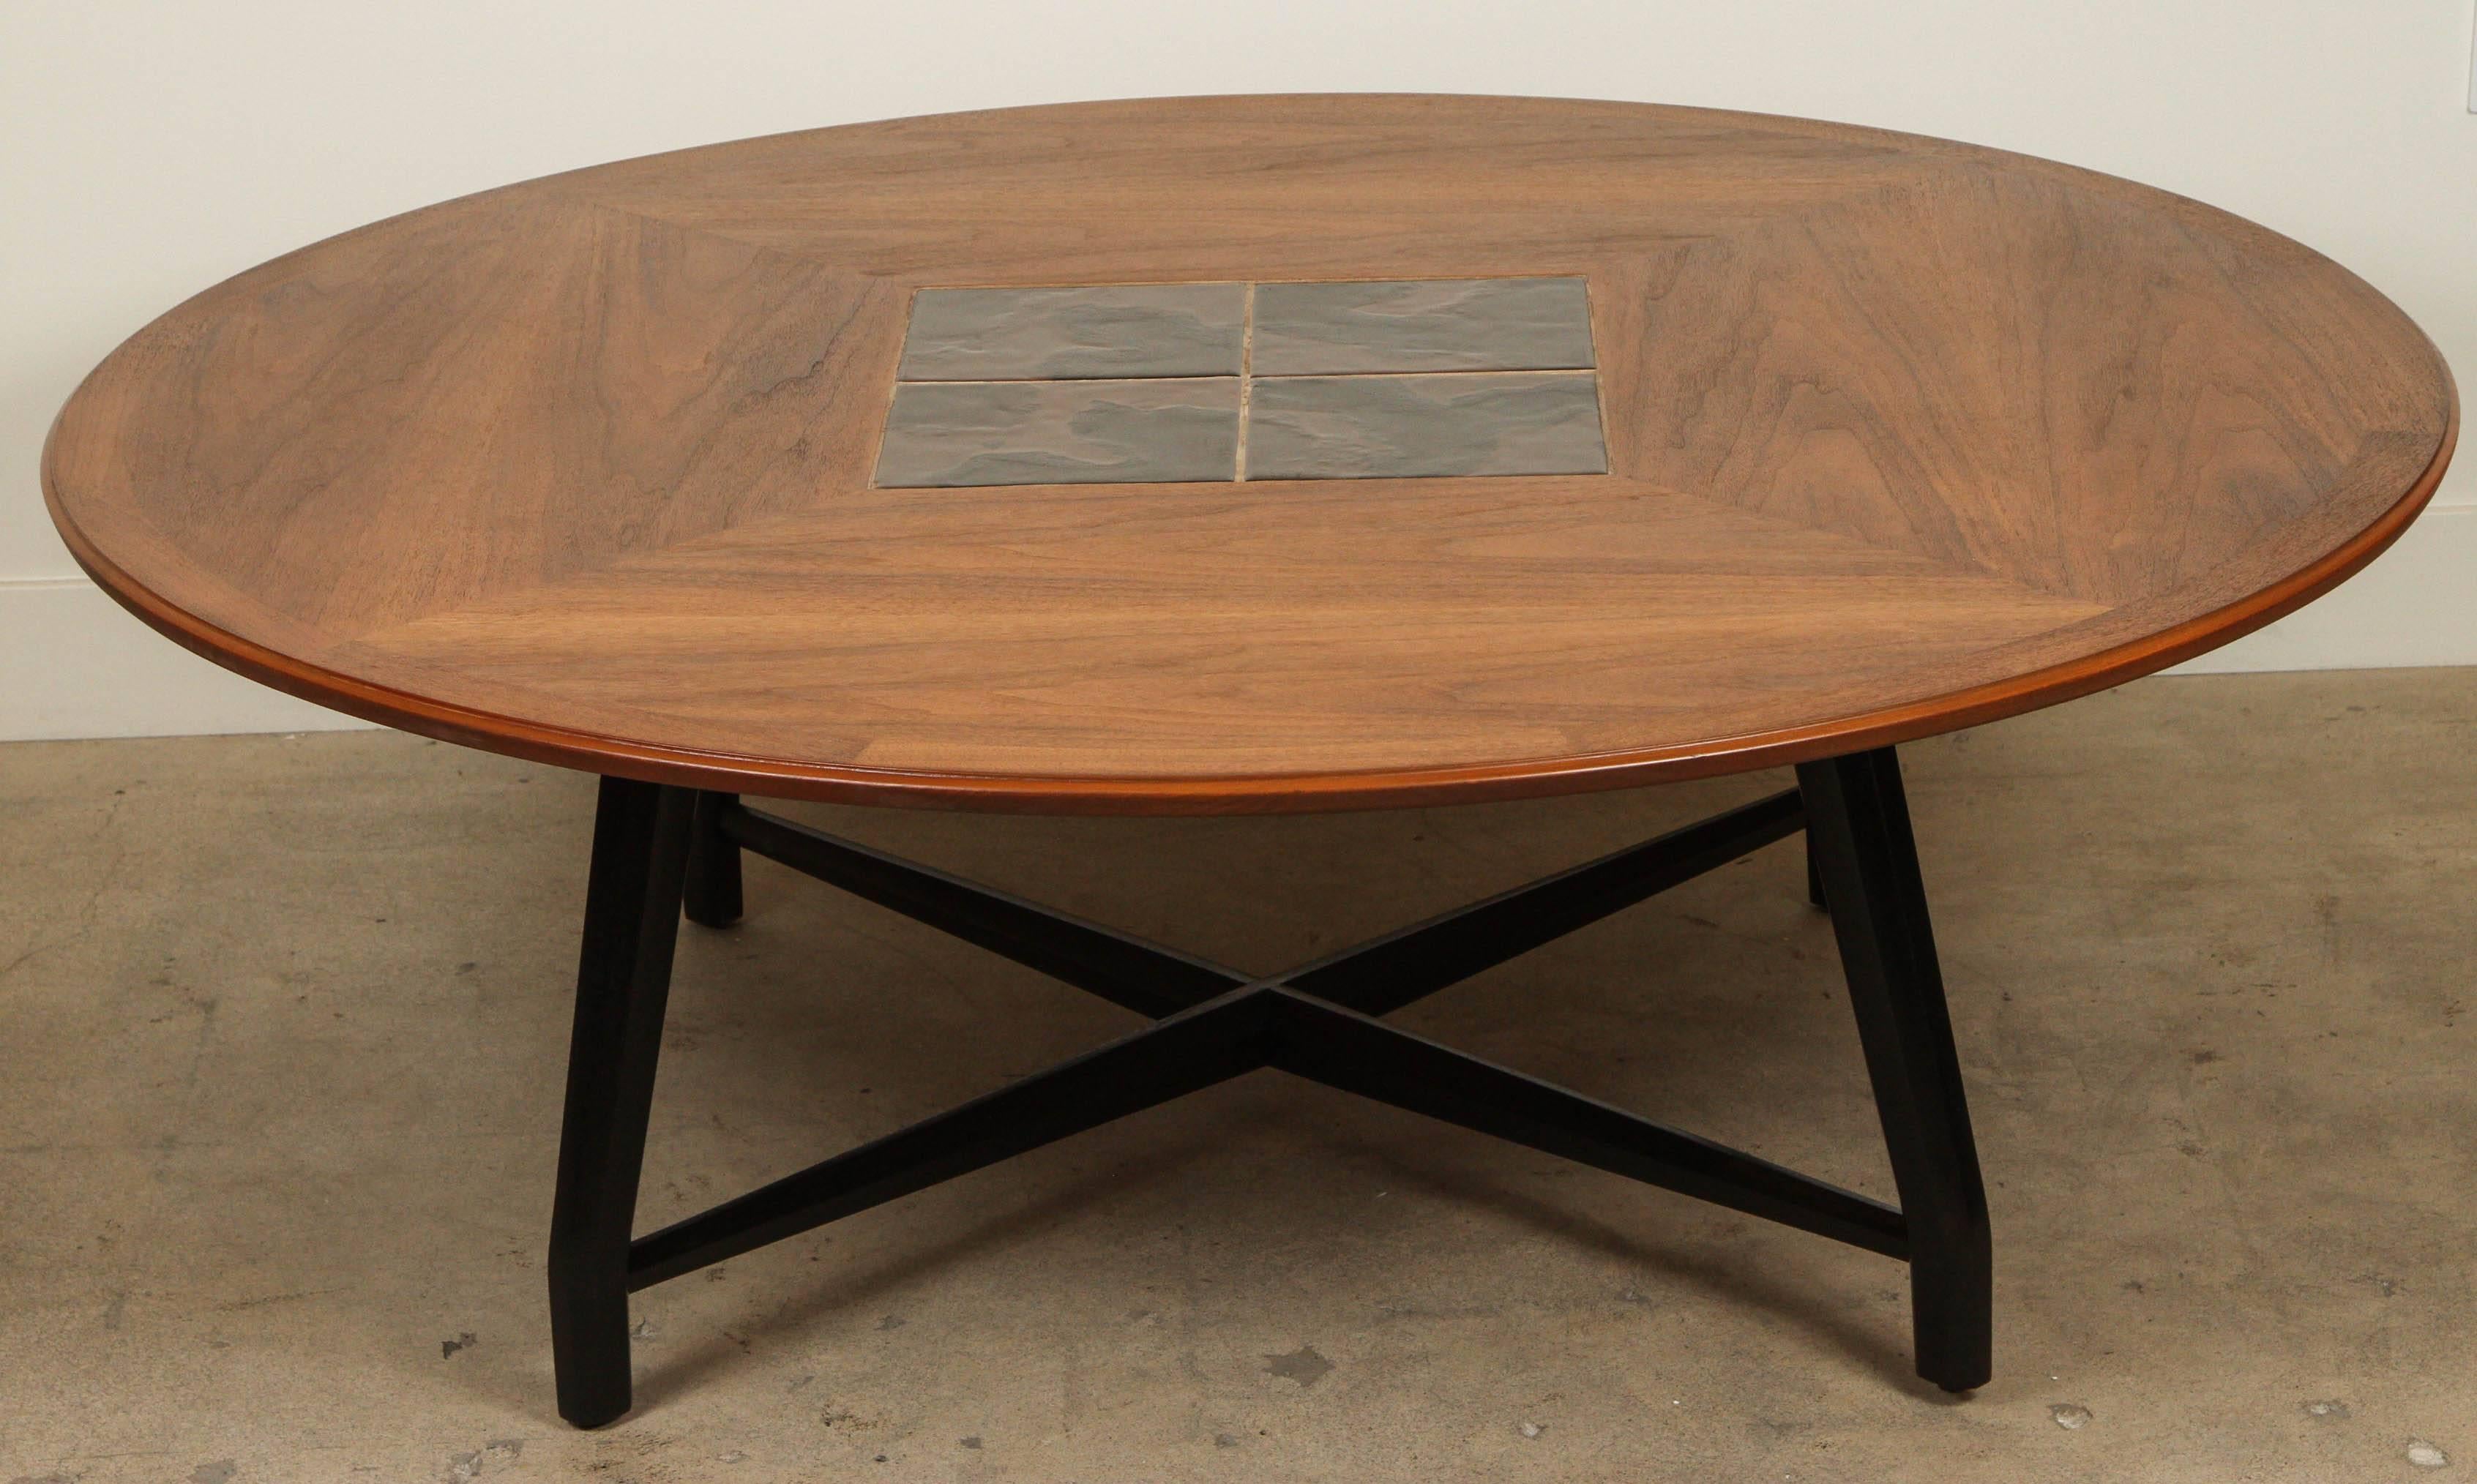 Tile and walnut coffee table attributed to Edward Wormley for Dunbar. Solid oak base. Unmarked.